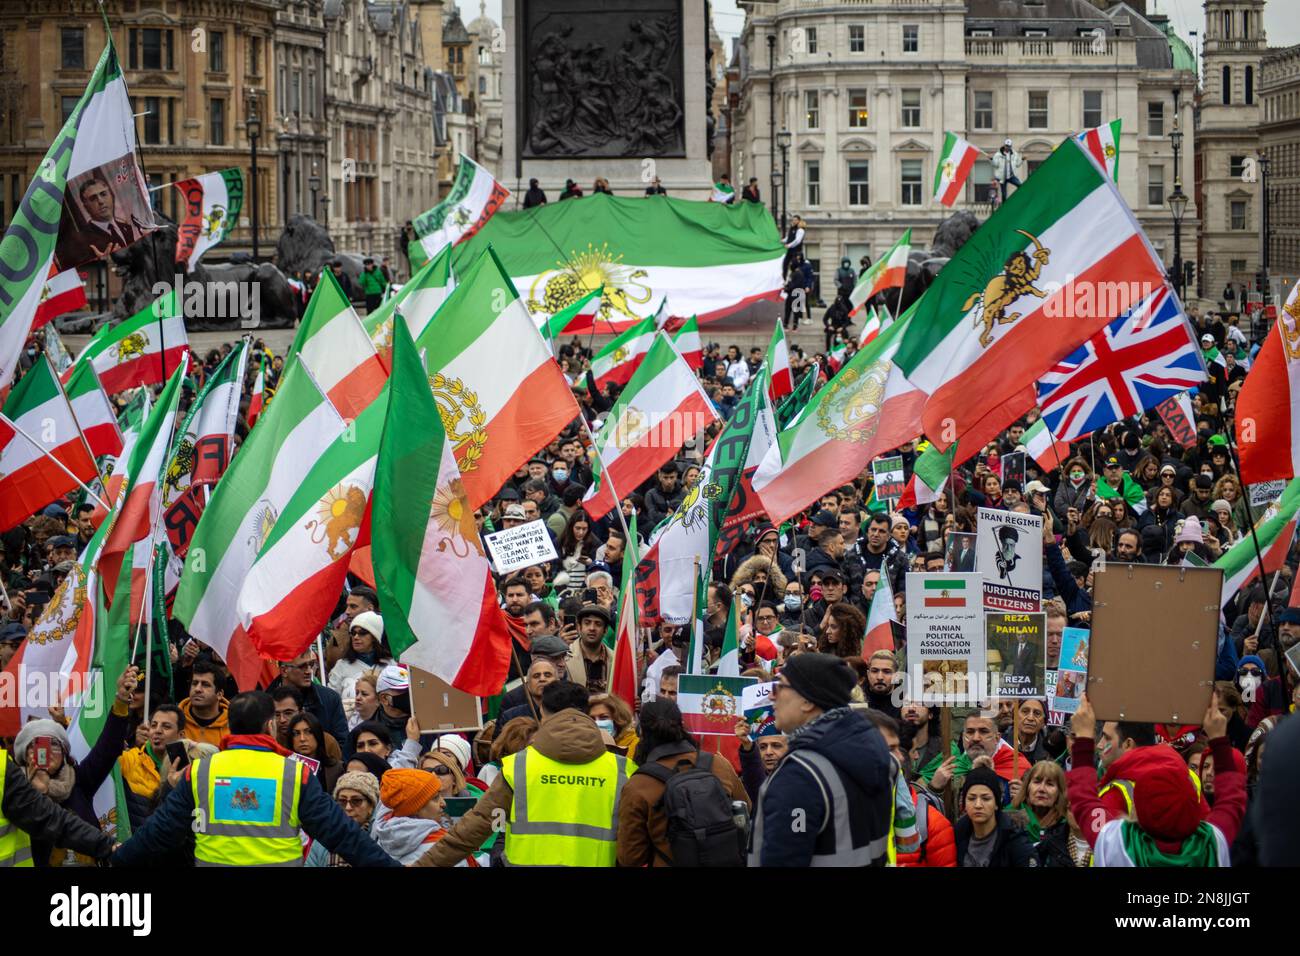 London, UK - 11 Feb 2023: As today marks the 44th anniversary of the Islamic Revolution in Iran. After more than five months of continuous protest in support of the woman, life, freedom movement, Thousands of protesters gathered in Trafalgar Sq. to denounce the Regime in Iran.  Protesters were holding banners with anti-regime symbols, such as Mahsa Amini’s picture and the Shir-o-Khorshid (Lion and Sun) flag of Iran—the flag, or its emblem, were part of Iranian national identity for centuries—which was changed after the Islamic Revolution in 1979.   Credit: Sinai Noor/Alamy Live News Stock Photo